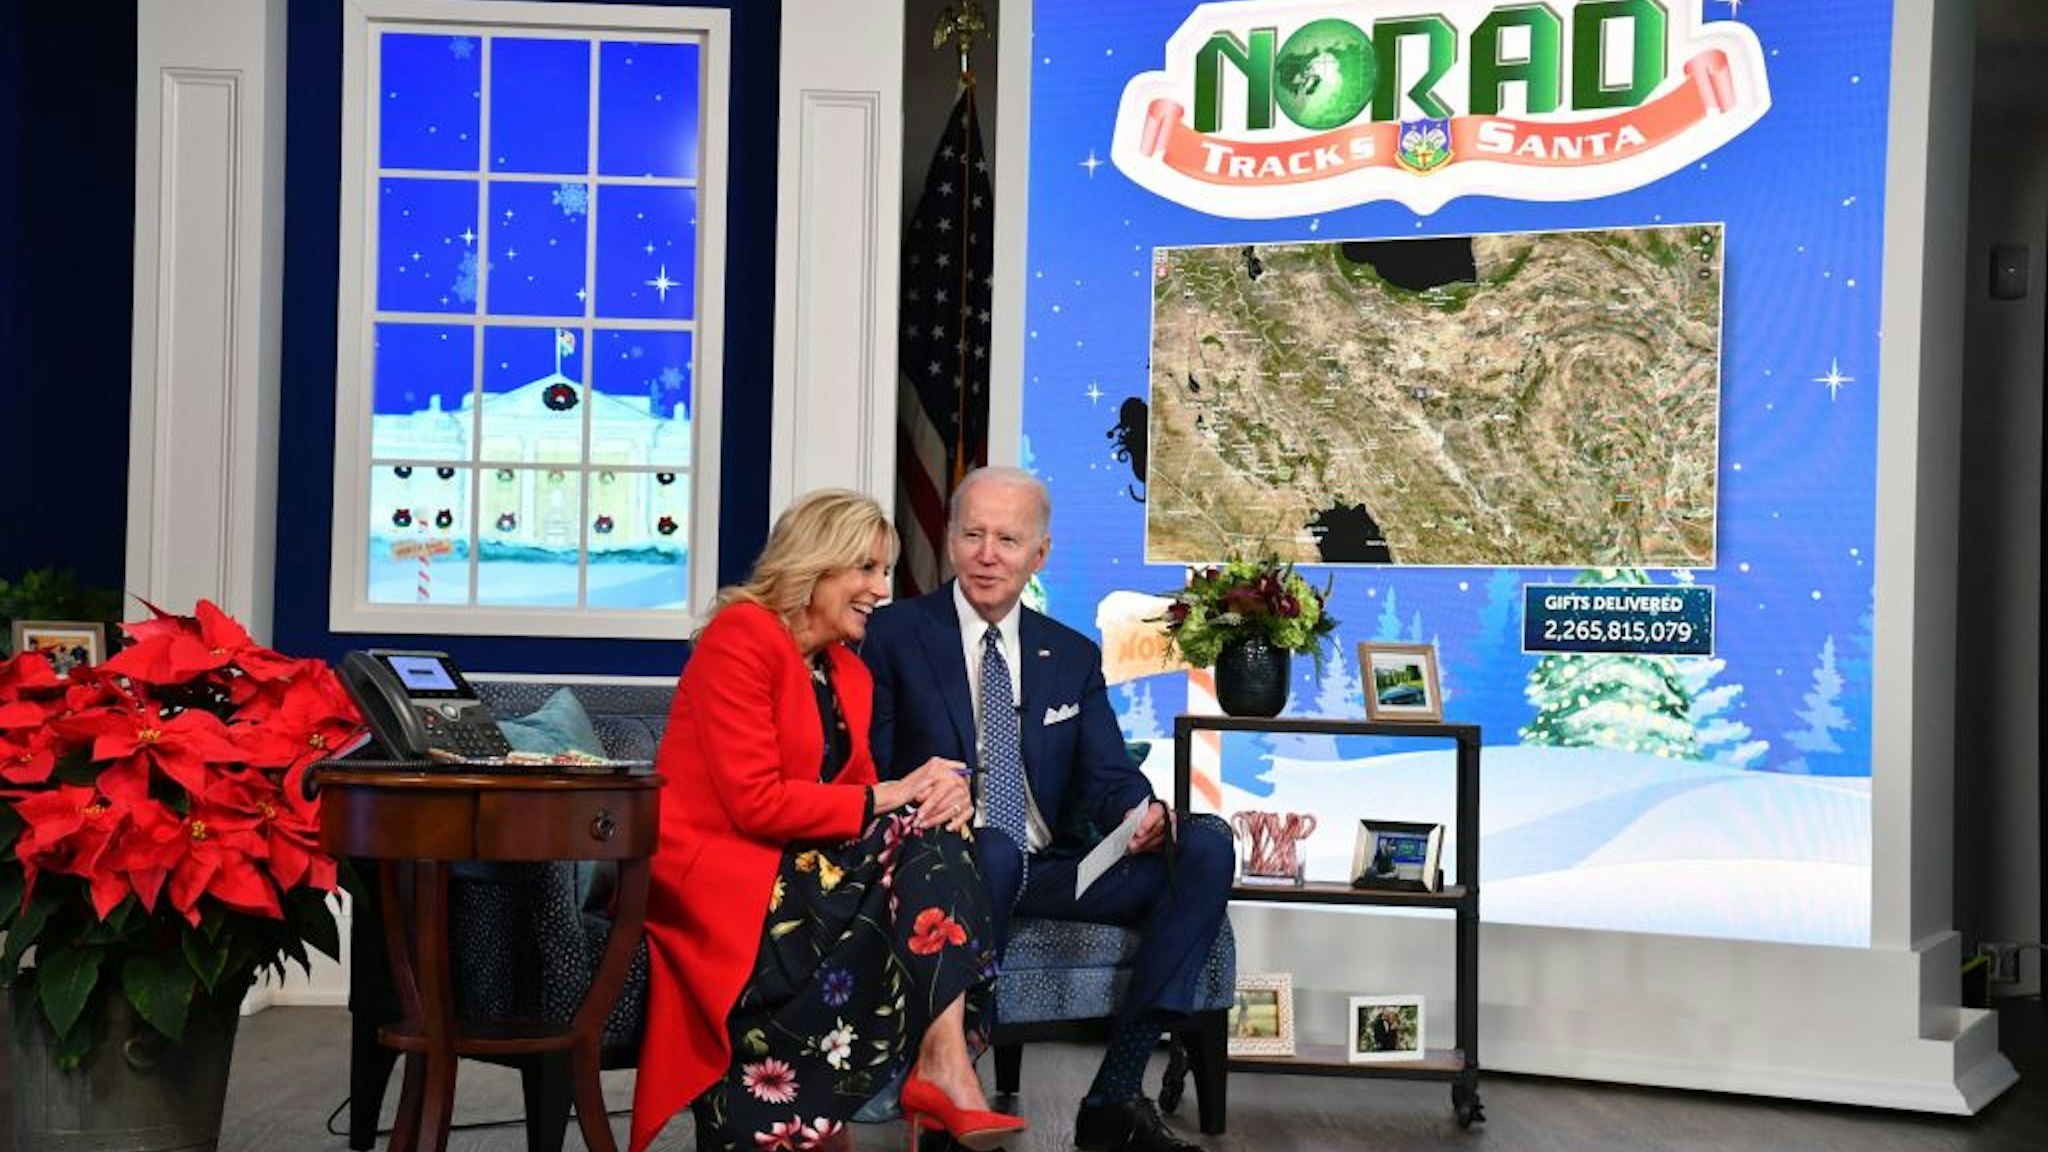 US President Joe Biden and First Lady Jill Biden speak with NORAD (North American Aerospace Defense Command) from the South Auditorium of the White House in Washington, DC, as NORAD tracks Santa Claus' travel over the globe delivering gifts on December 24, 2021. (Photo by Nicholas Kamm / AFP) (Photo by NICHOLAS KAMM/AFP via Getty Images)